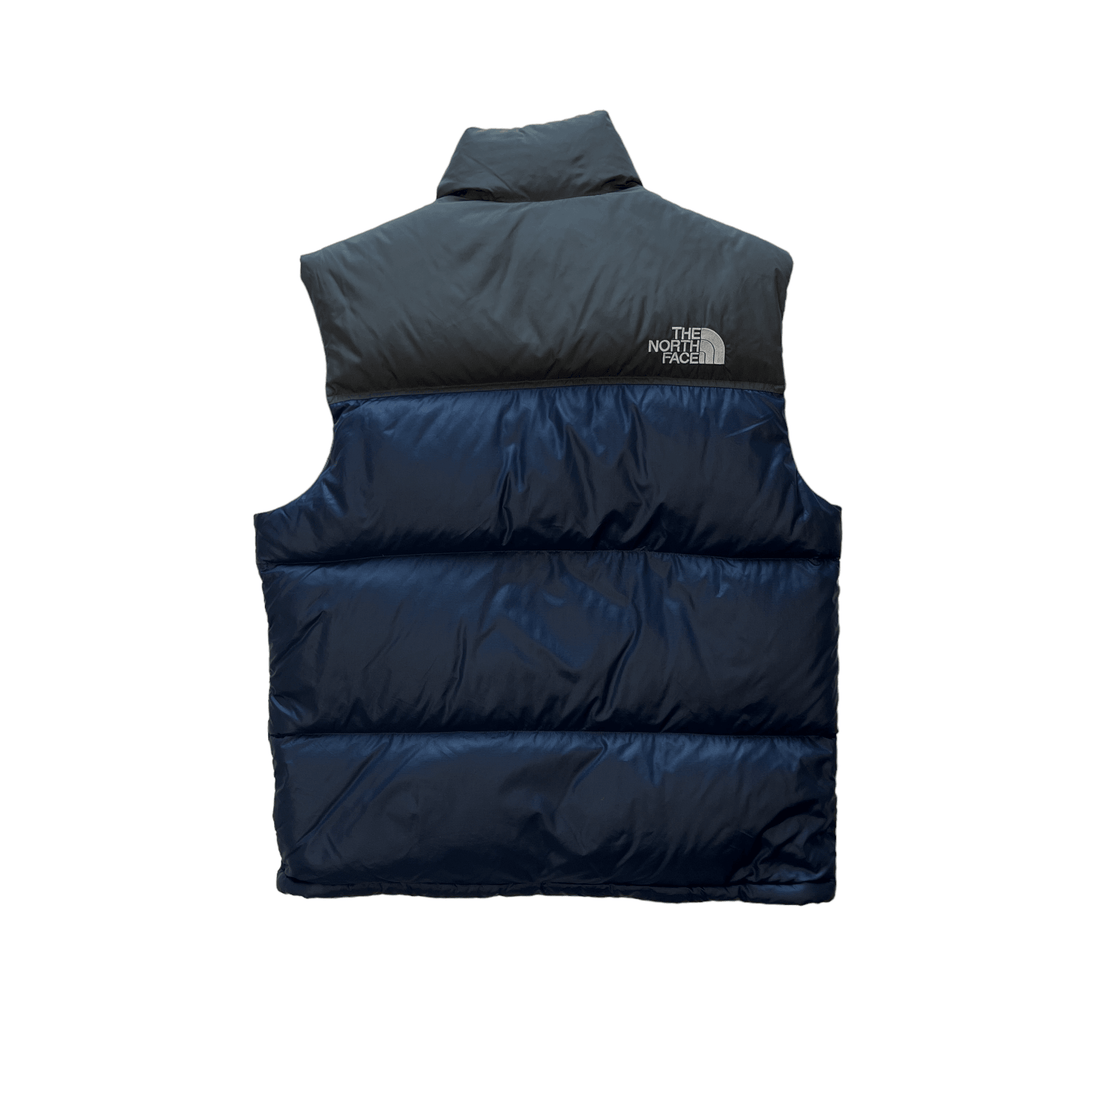 Vintage Blue + Grey The North Face (TNF) Puffer Gilet - Extra Large - The Streetwear Studio